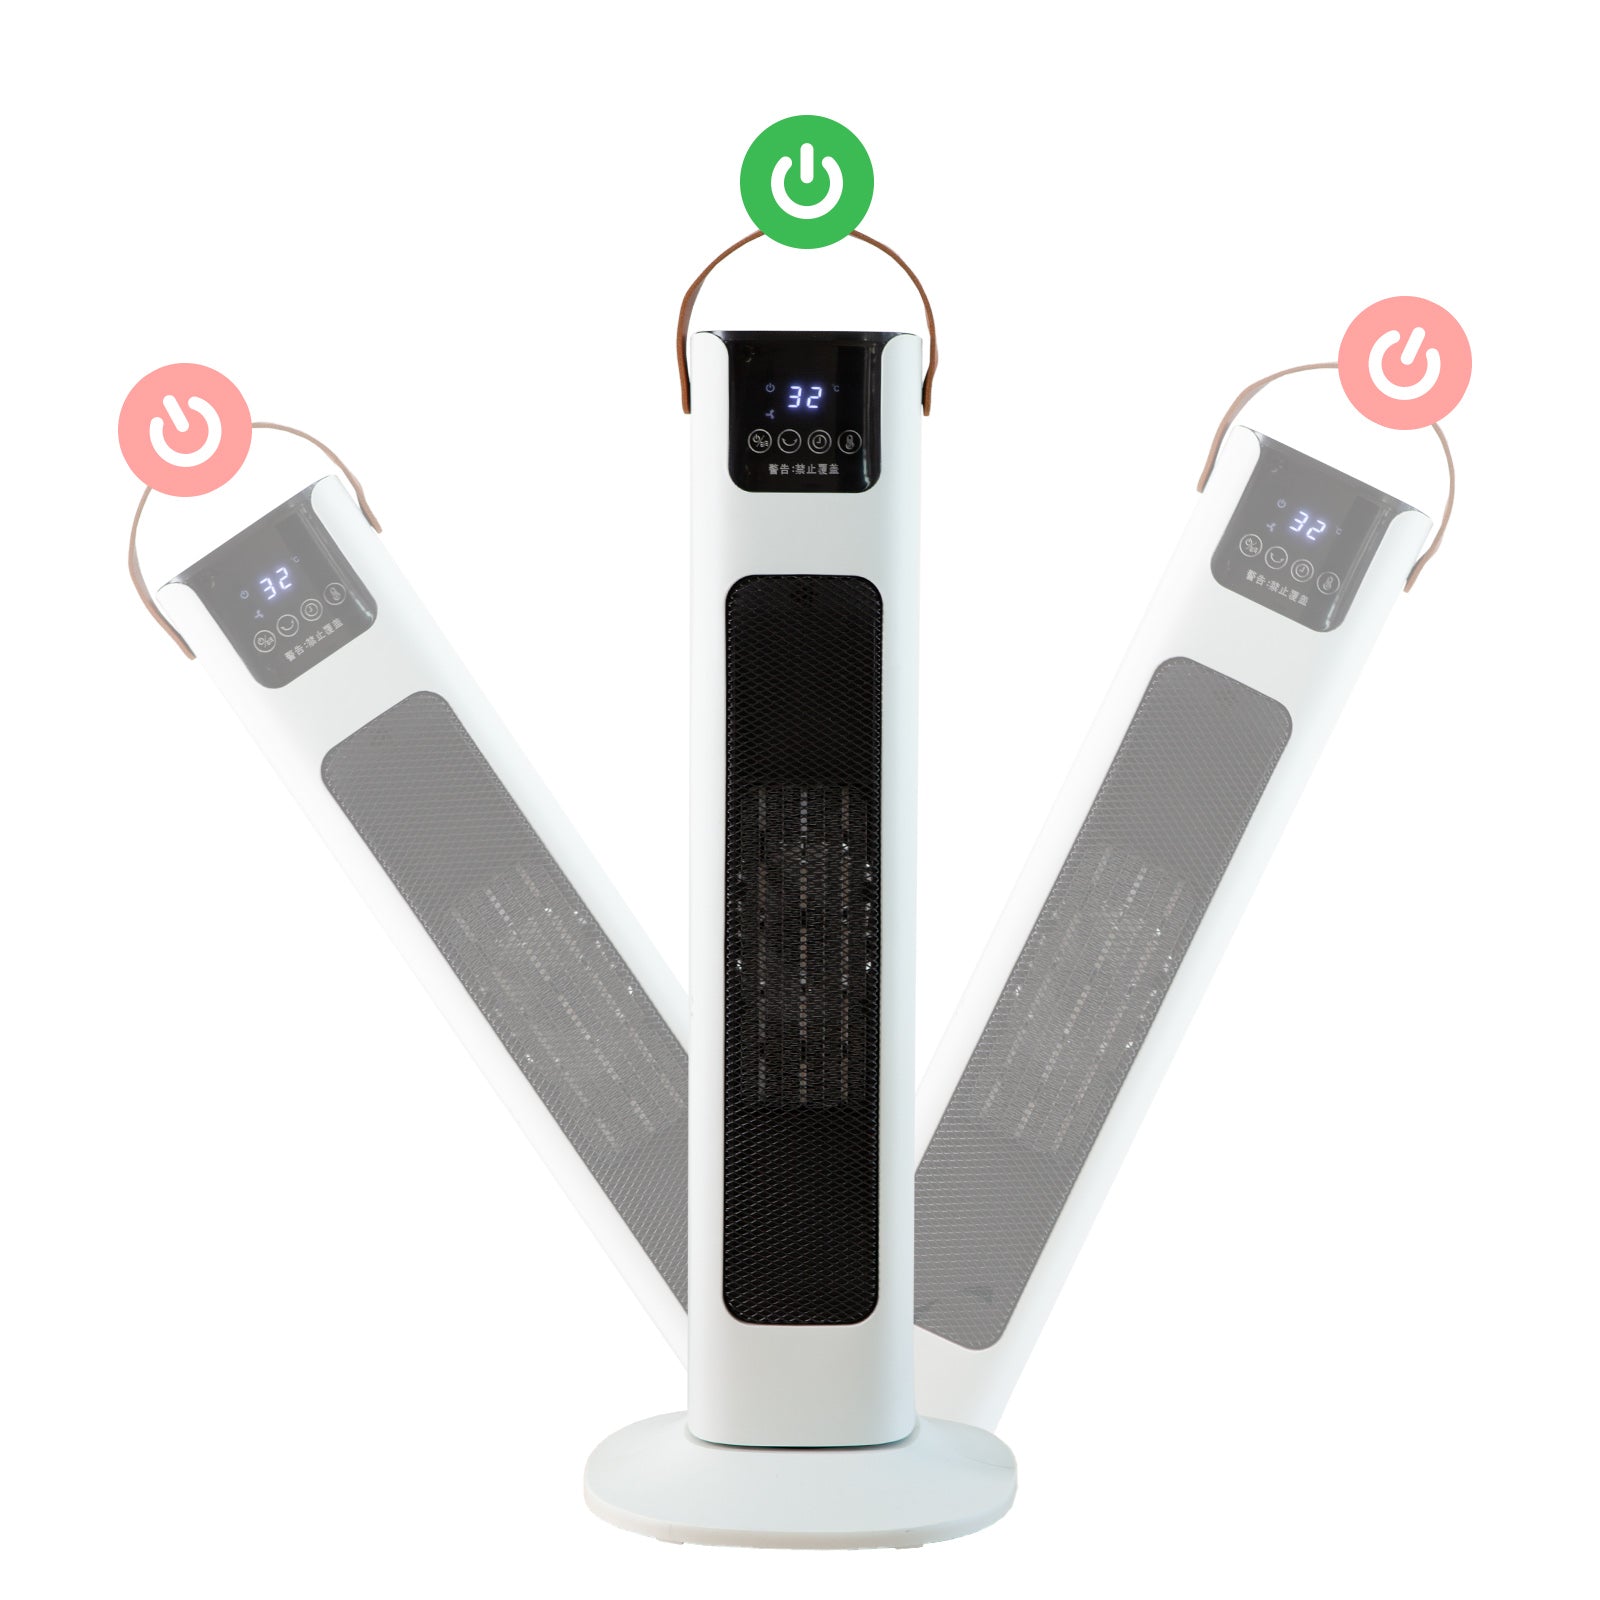 Electric Ceramic Tower Heater Remote Control Portable OVanting - White